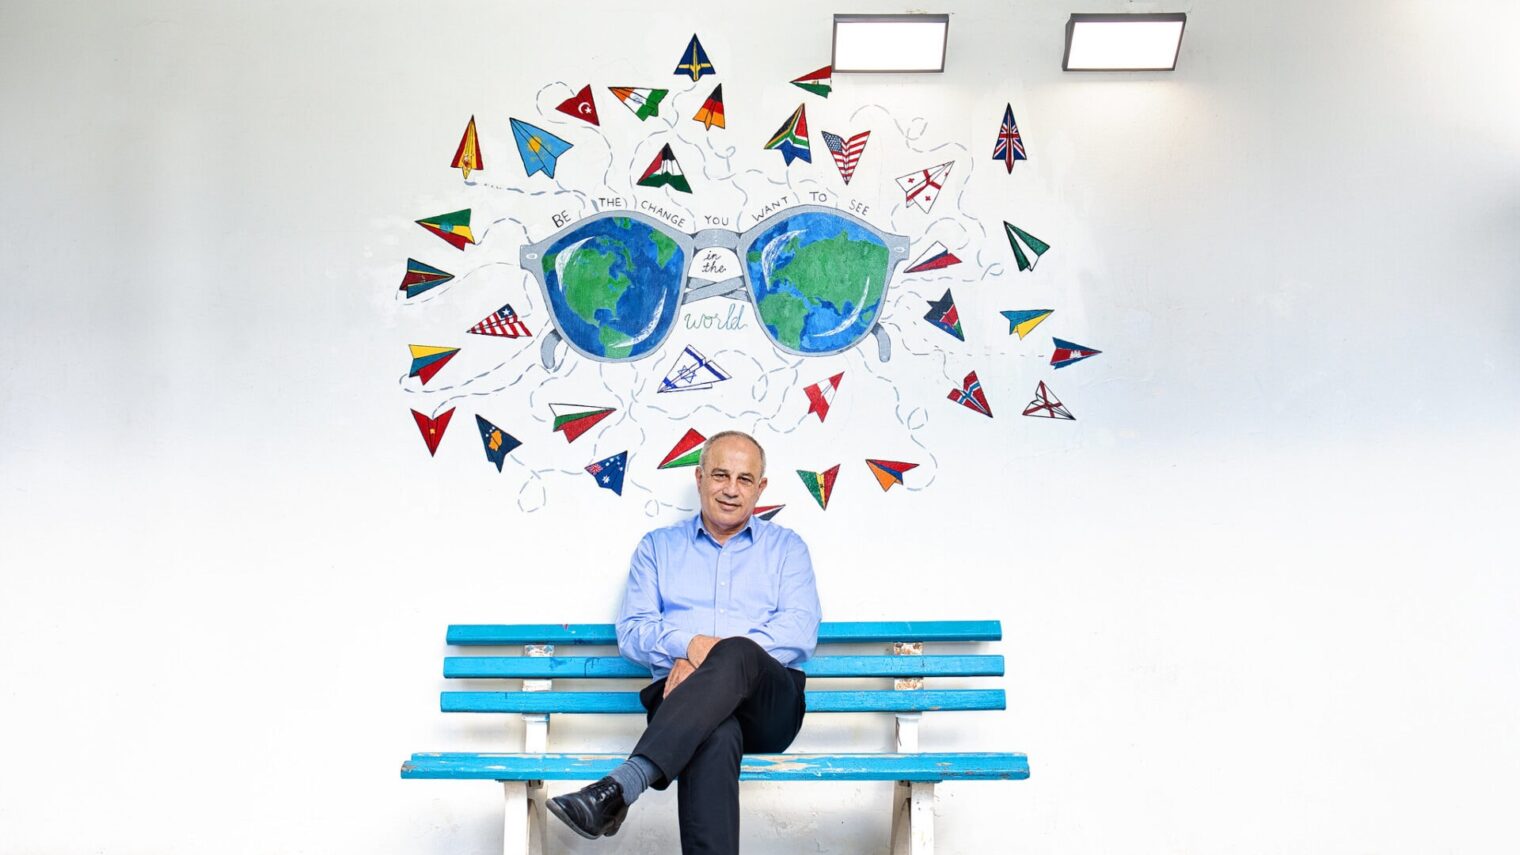 Be the change you want to see. Mohammad Darawshe, Director of Strategy at Givat Haviva. Photo by Noam Chen